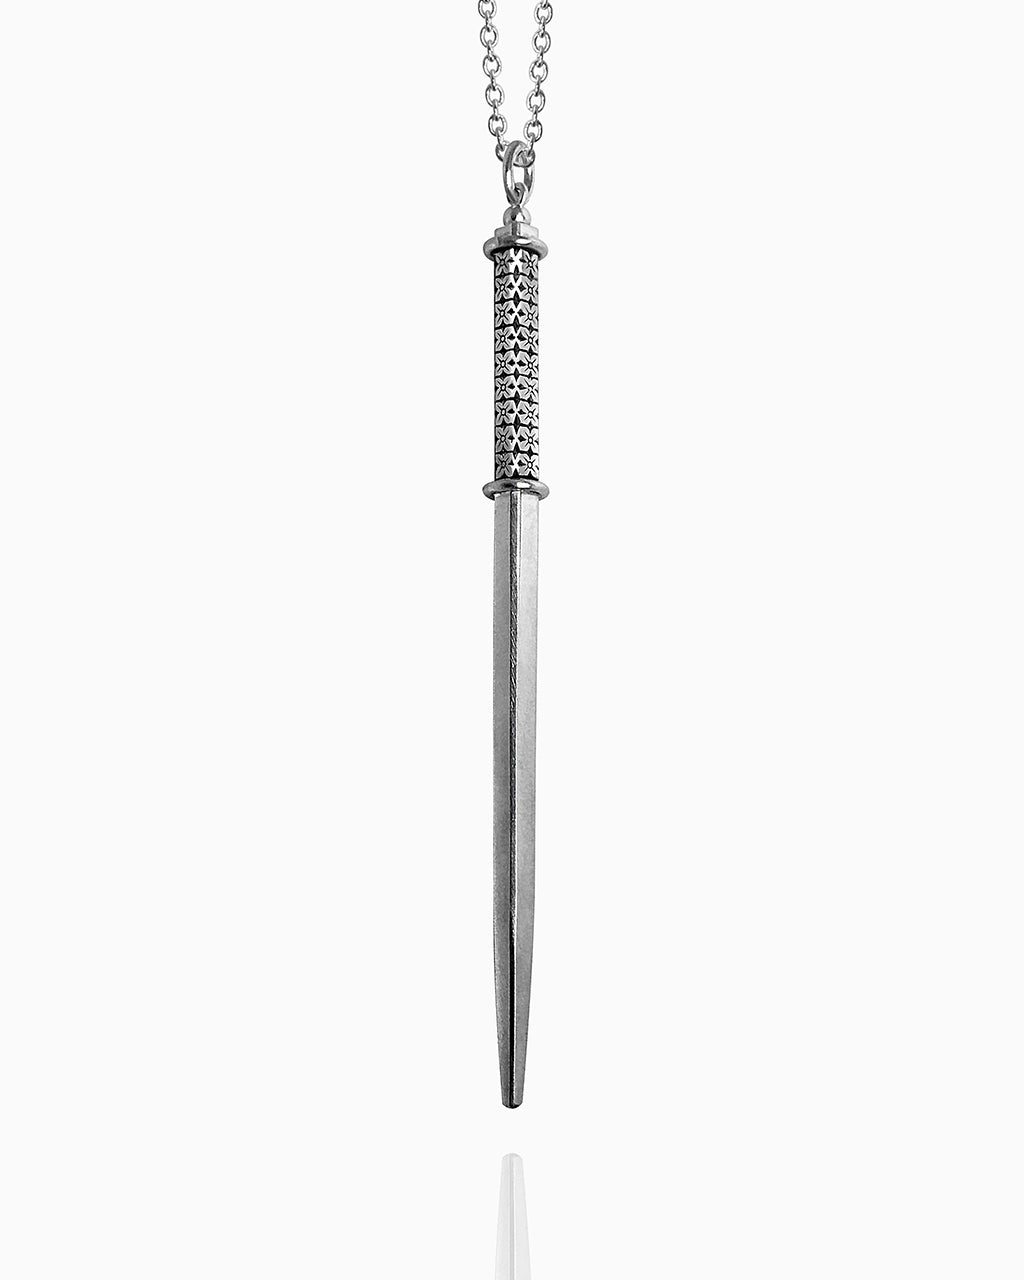 A polished sterling silver wand pendant hangs from a chain against a white background. The square shape has two silver rings around it—one at the top and another one-third of the way down the wand to define the handle. Between those rings, the handle of the wand is hand-engraved with a floral pattern on all four sides.